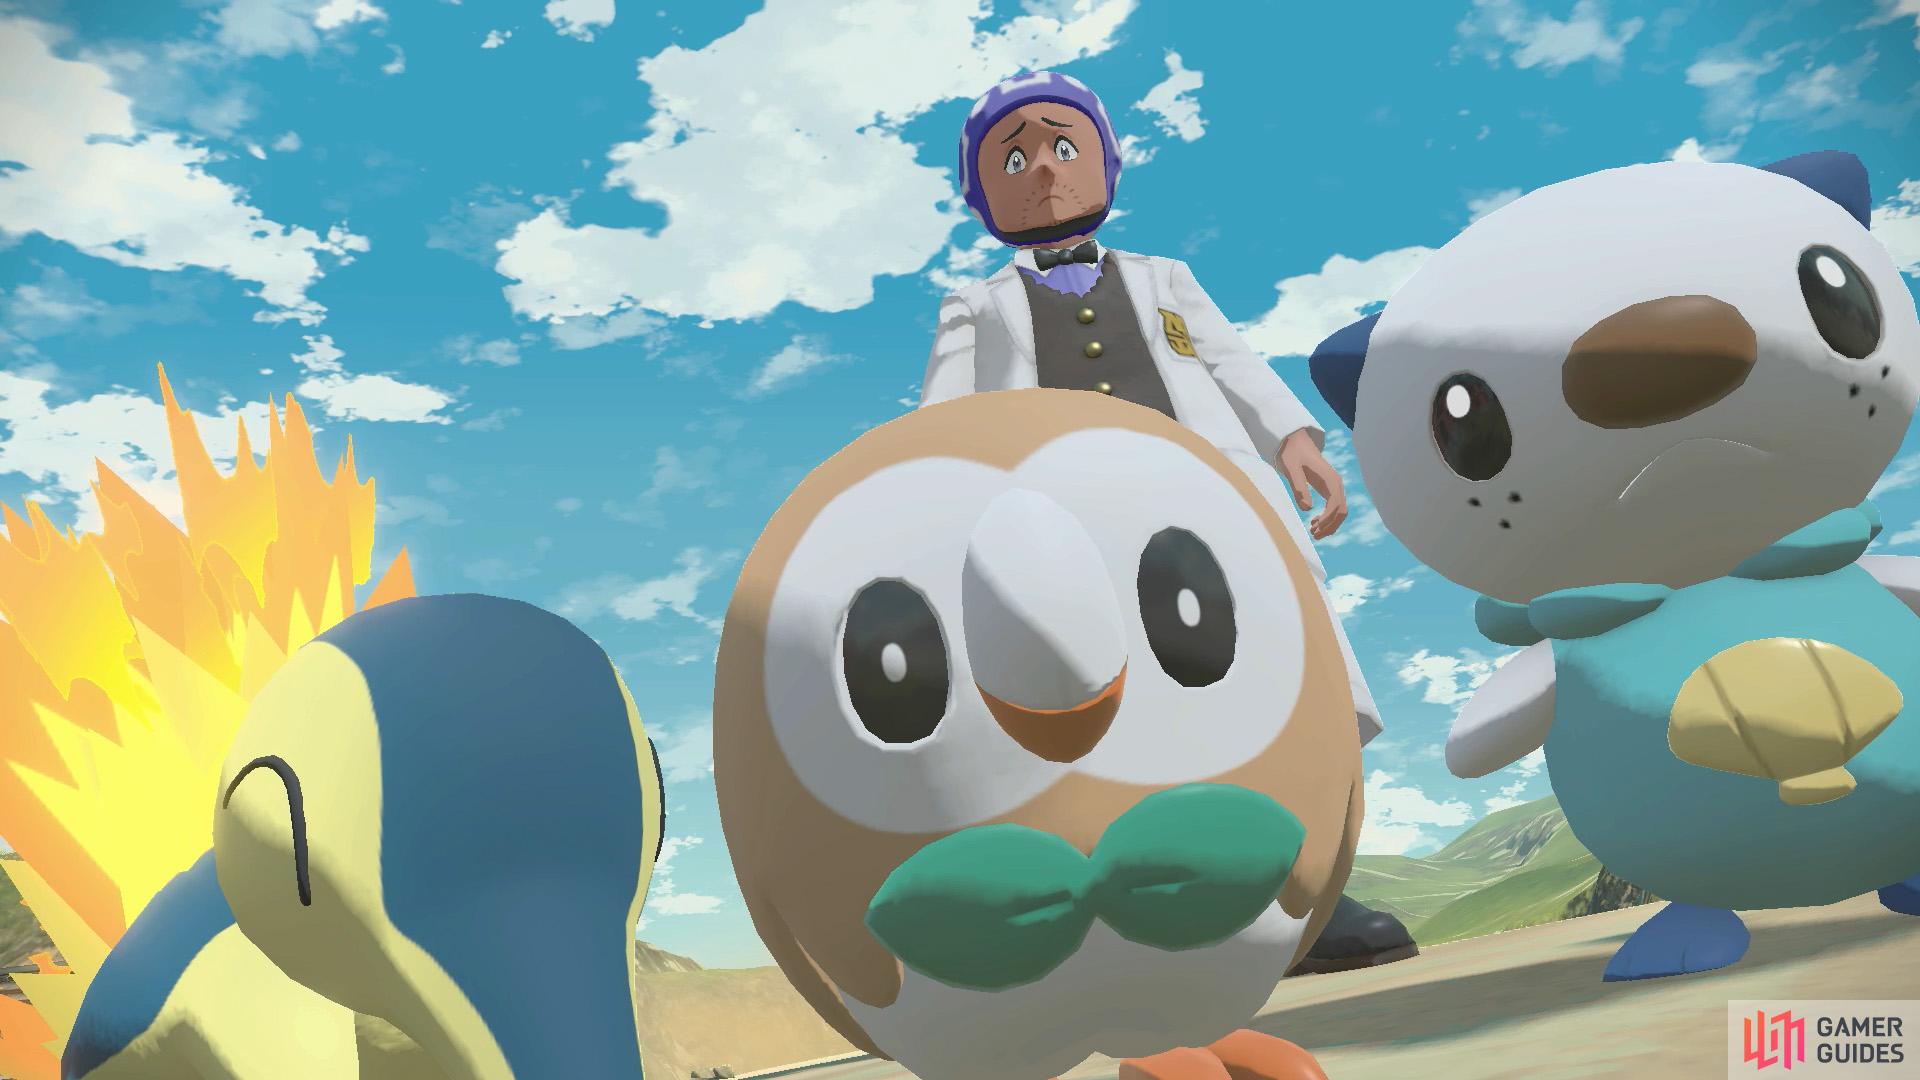 You'll awaken to find yourself surrounded by a Cyndaquil, Oshawott and Rowlet.